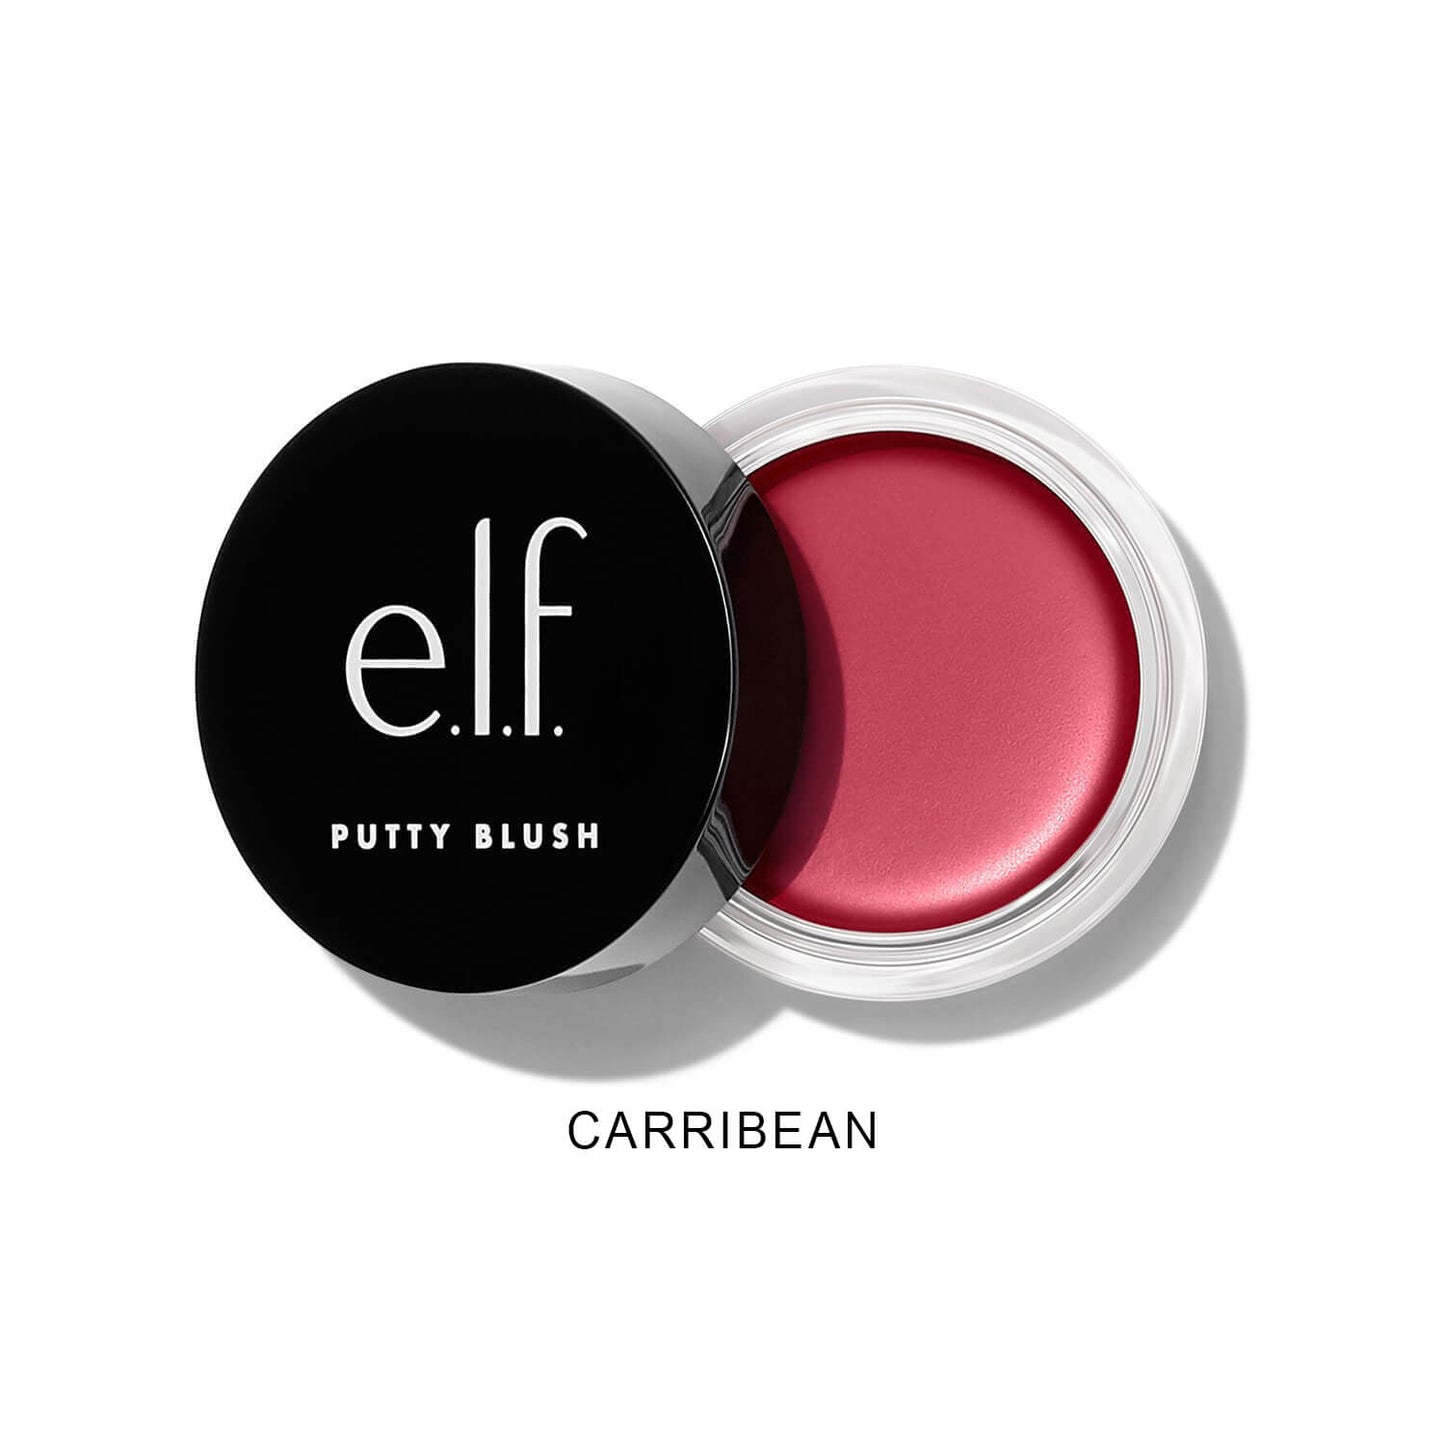 Shop elf putty blush in carribean shade available at Heygirl.pk for delivery in Pakistan